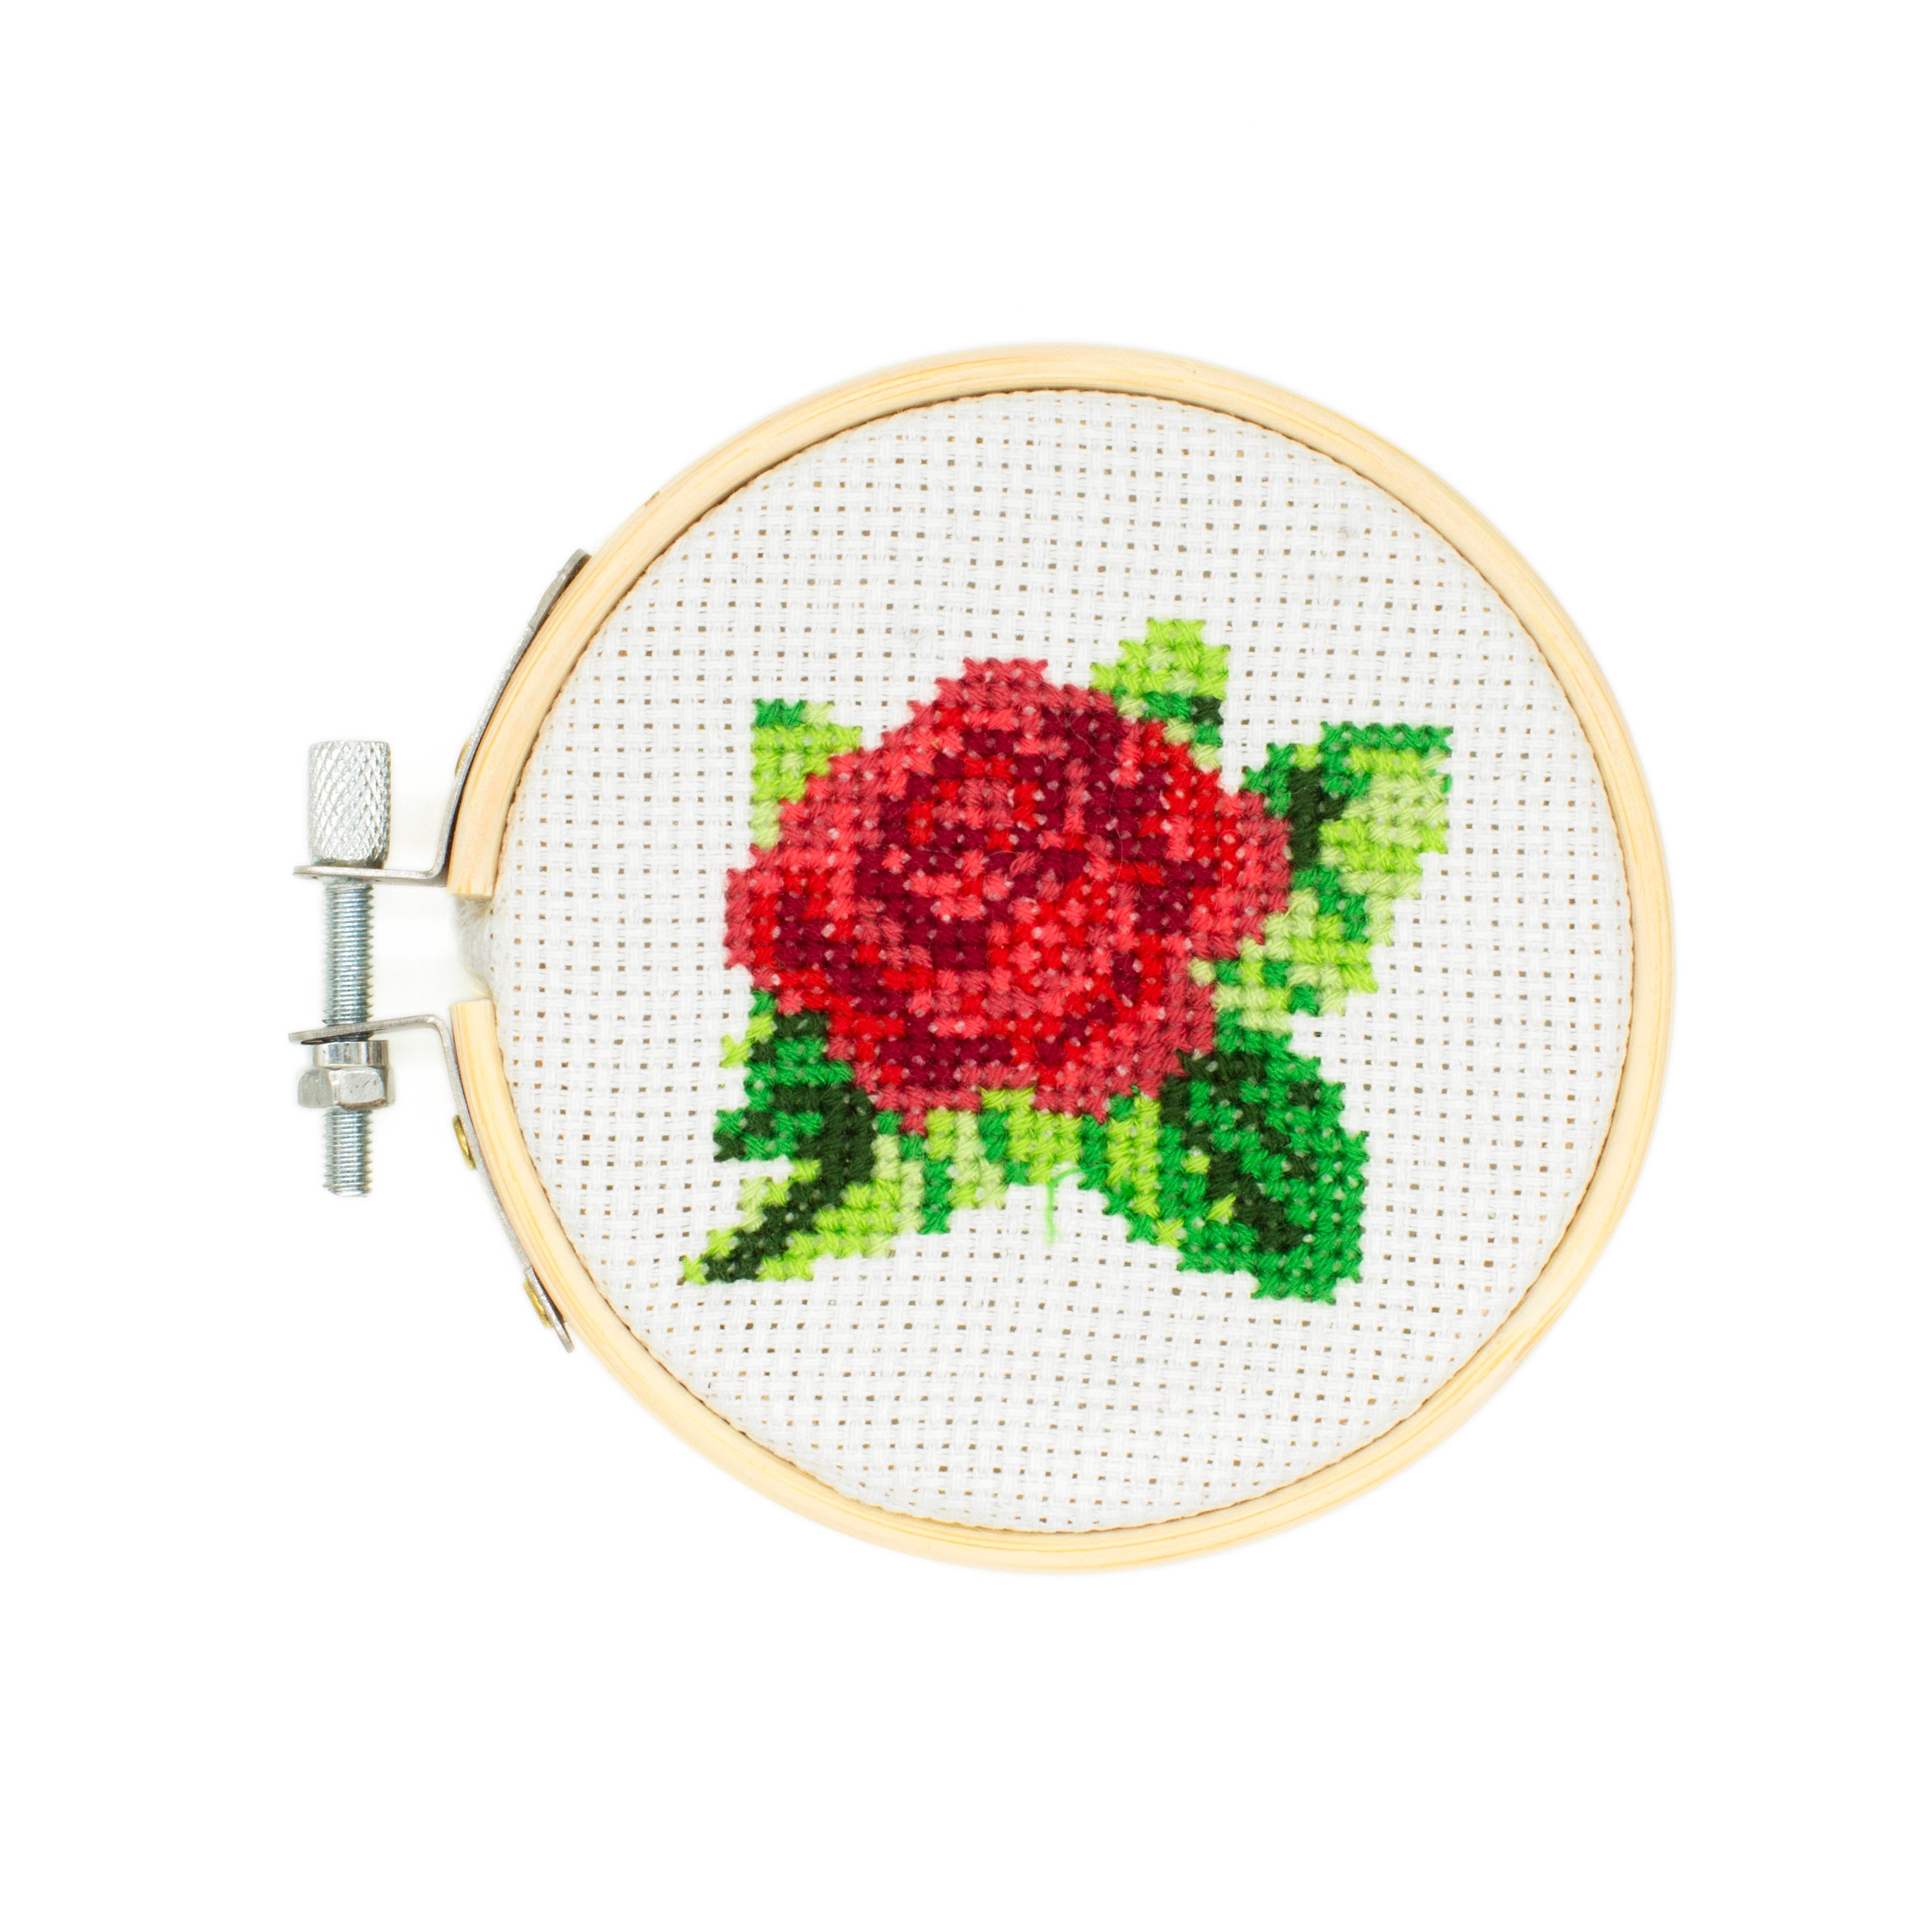 Embroidery Starter Kit, Cross Stitch Kit with Floral Pattern, Embroidery Hoop, Color Threads and Tools, Cat and Flower